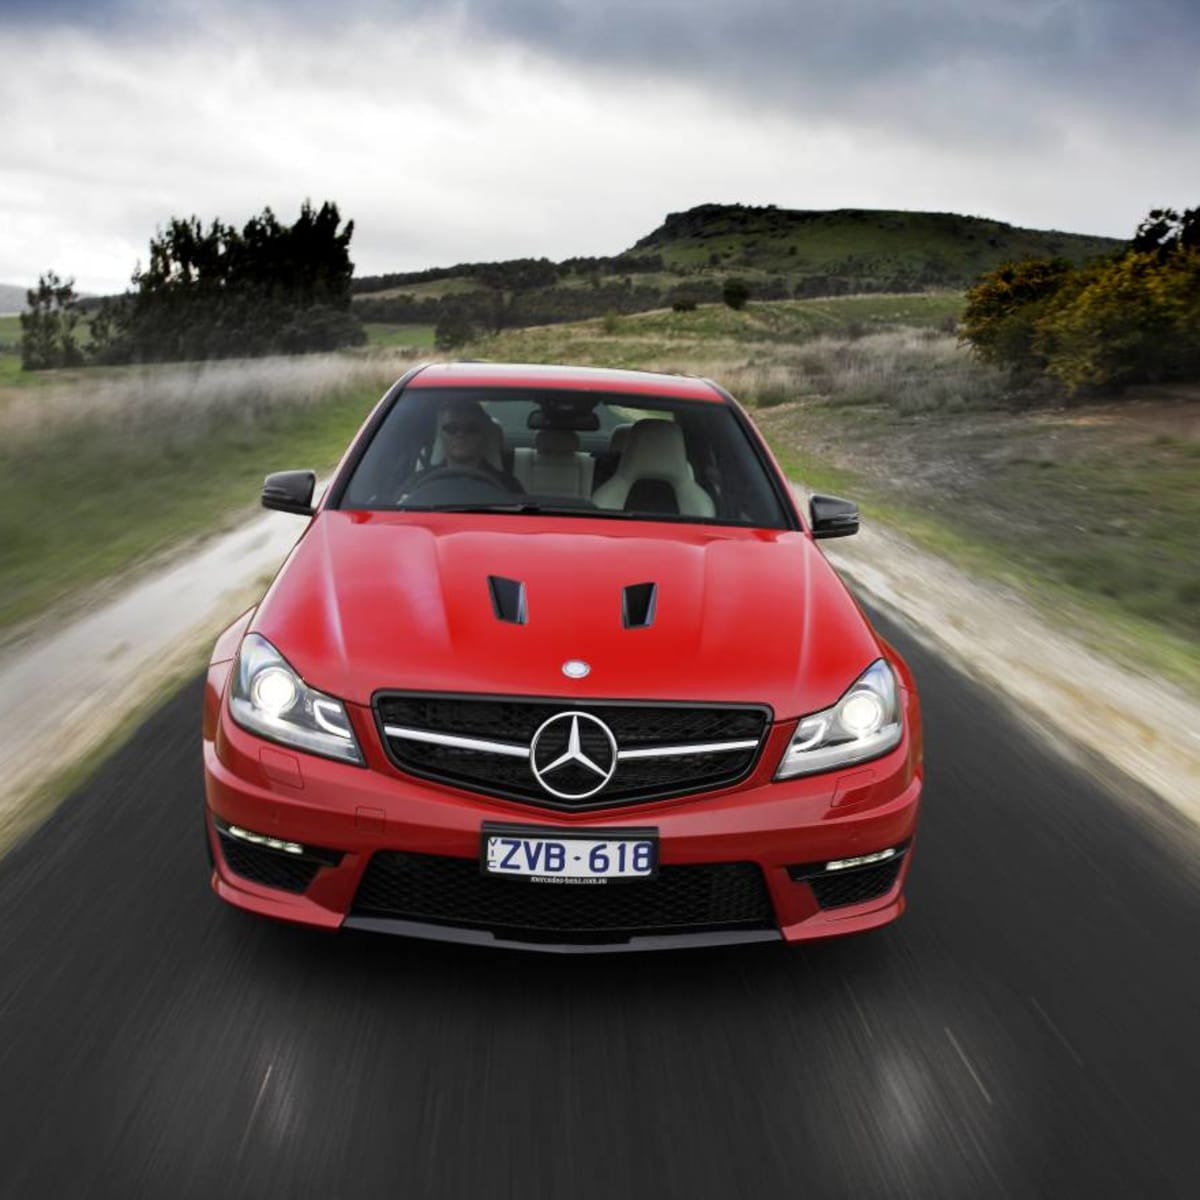 Mercedes Benz C63 Amg Edition 507 Review Caradvice